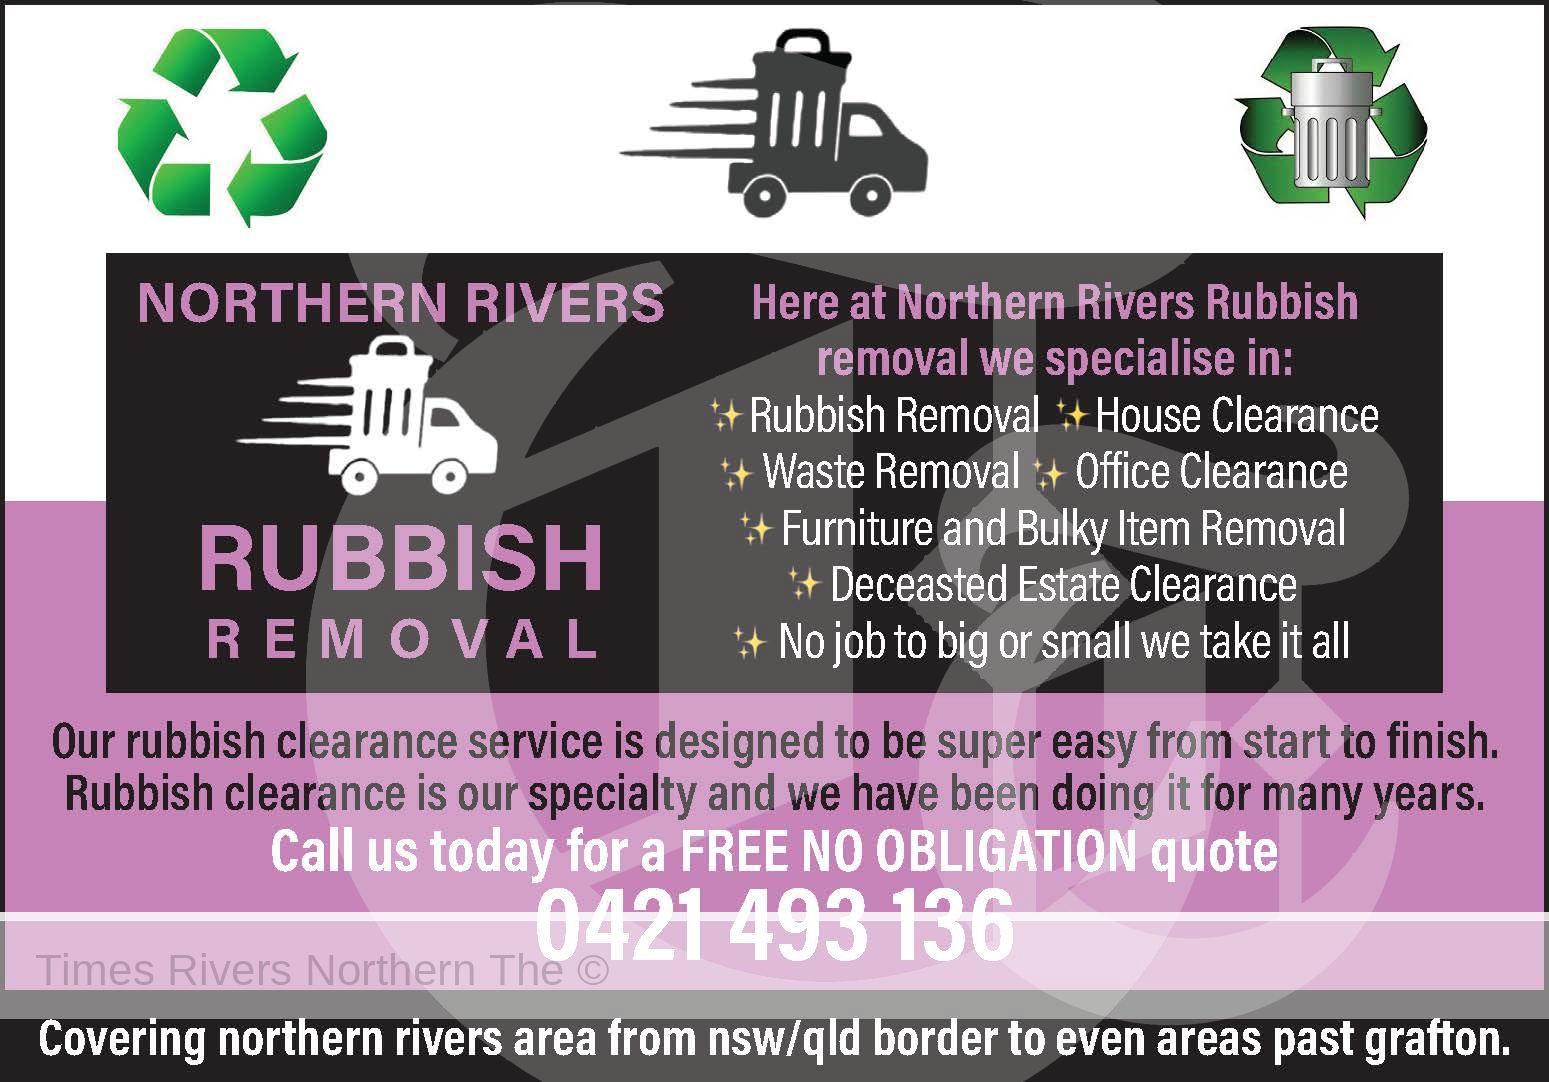 Northern Rivers Rubbish Removal